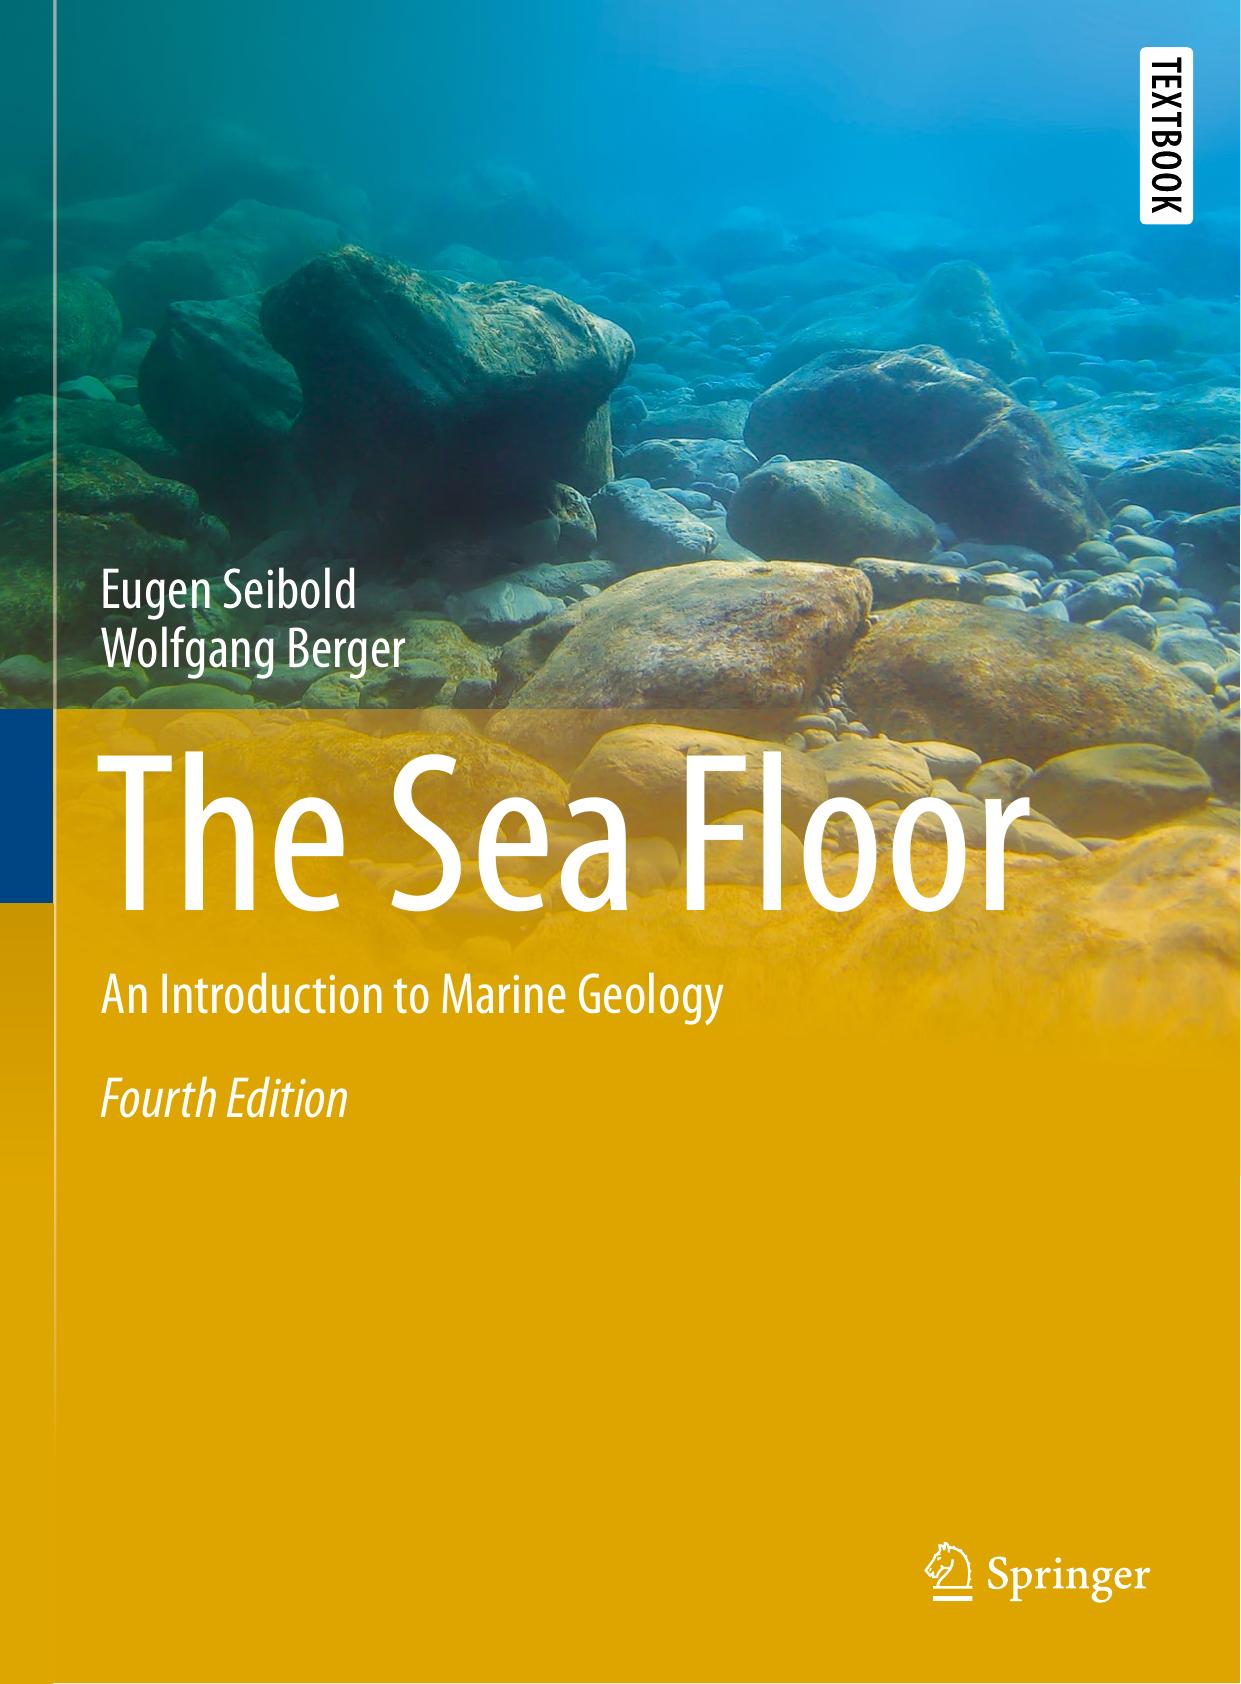 The Sea Floor An Introduction to Marine Geology2017